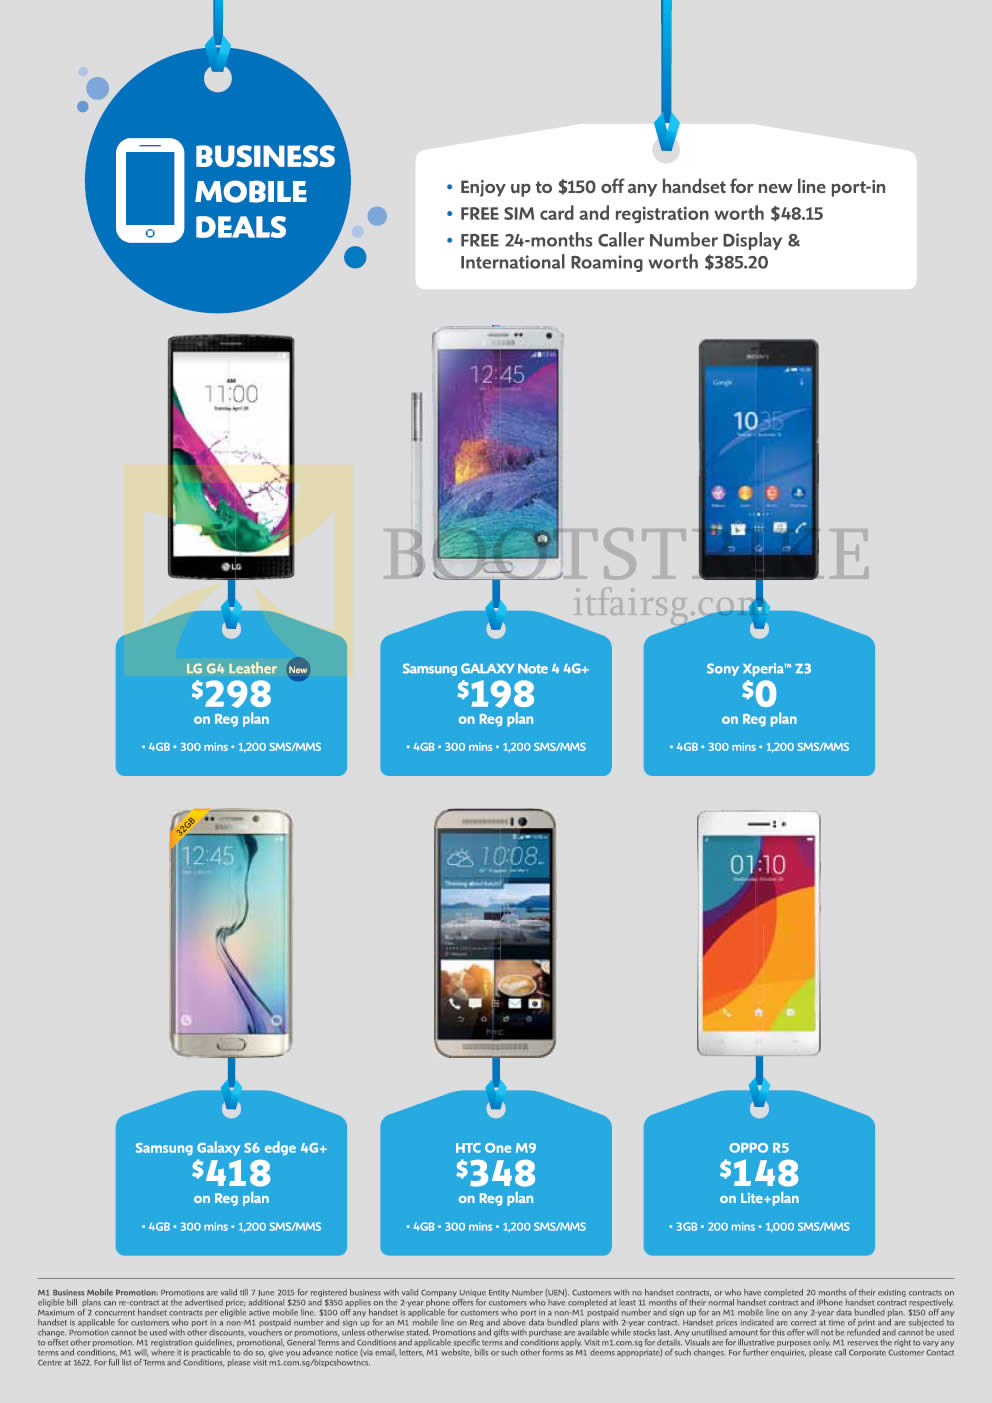 PC SHOW 2015 price list image brochure of M1 Business Mobile LG G4 Leather, Galaxy Note 4, Xperia Z3, S6 Edge, One M9, Oppo R5